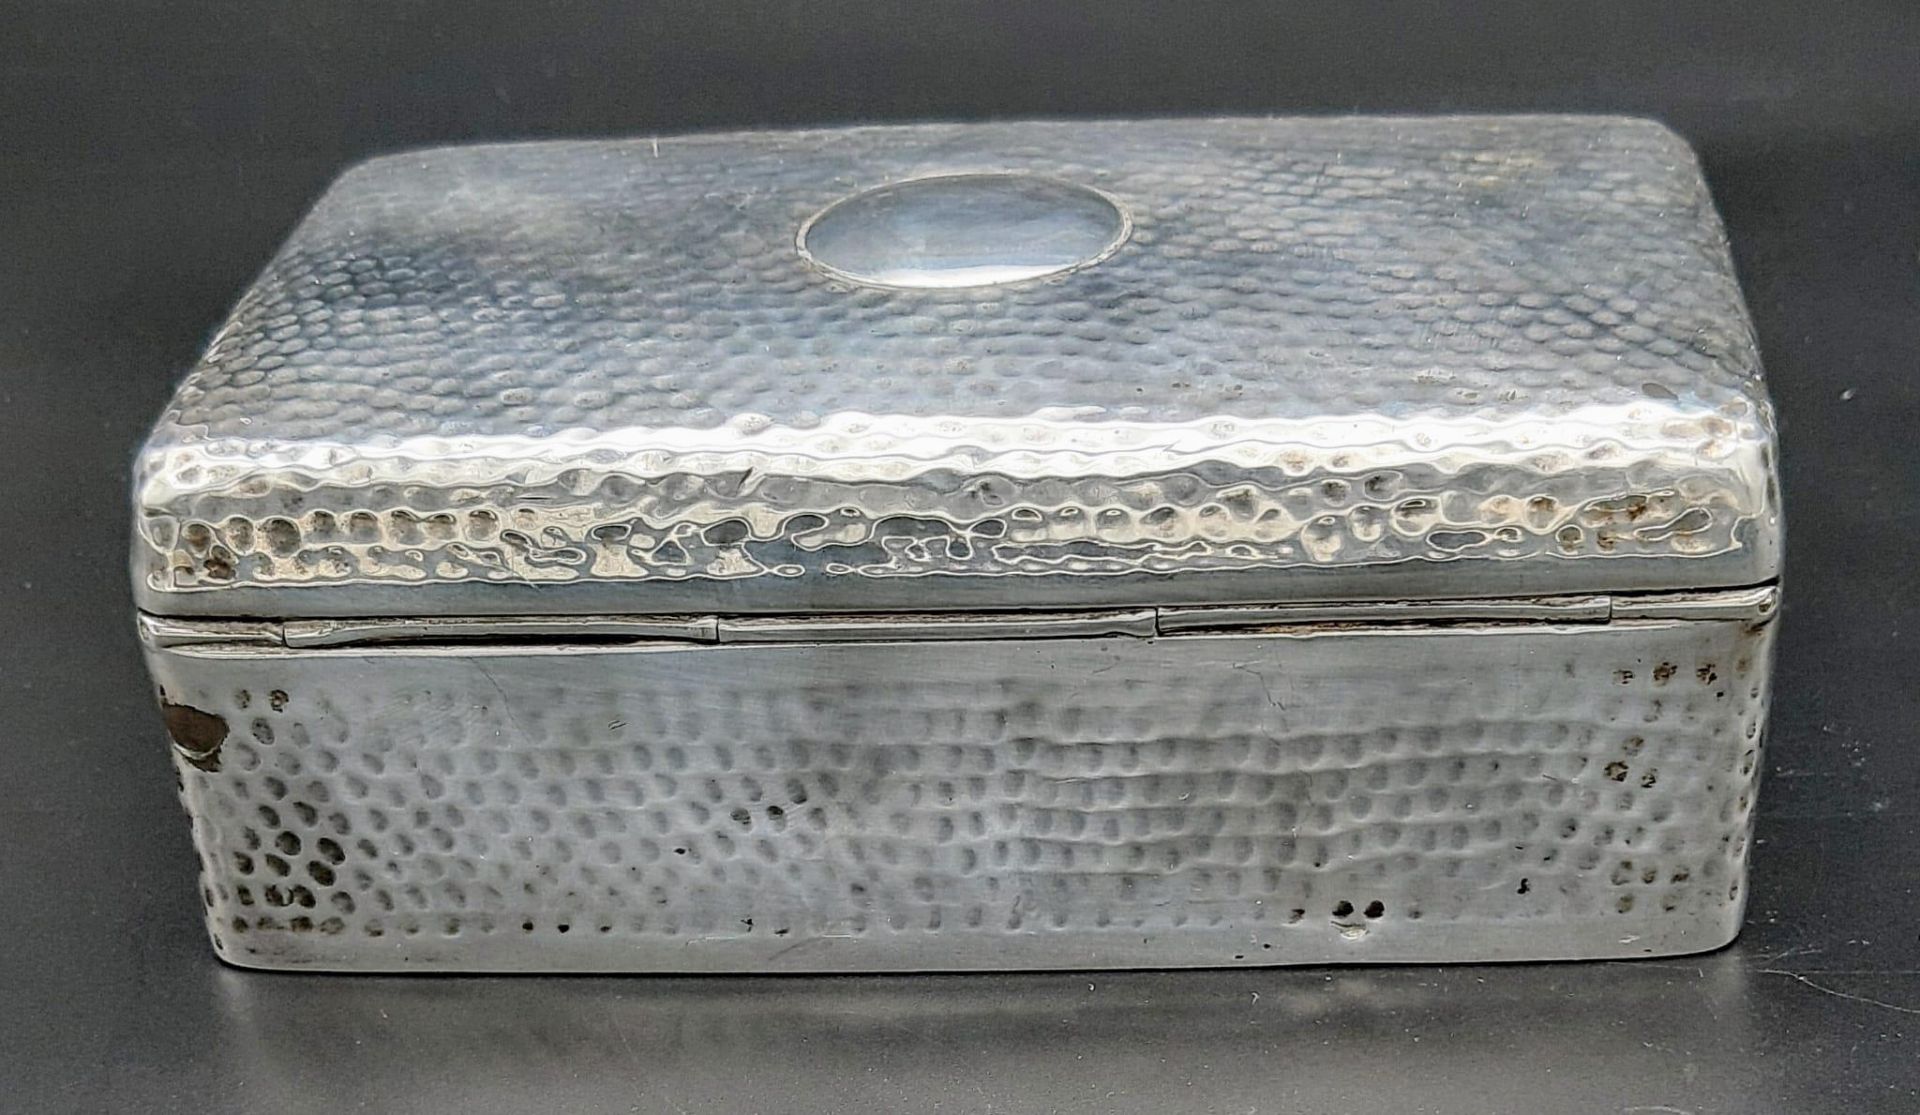 A Wonderful Antique Sterling Silver Cigarette, Cheroot Case. Dimpled silver exterior with a good - Image 3 of 8